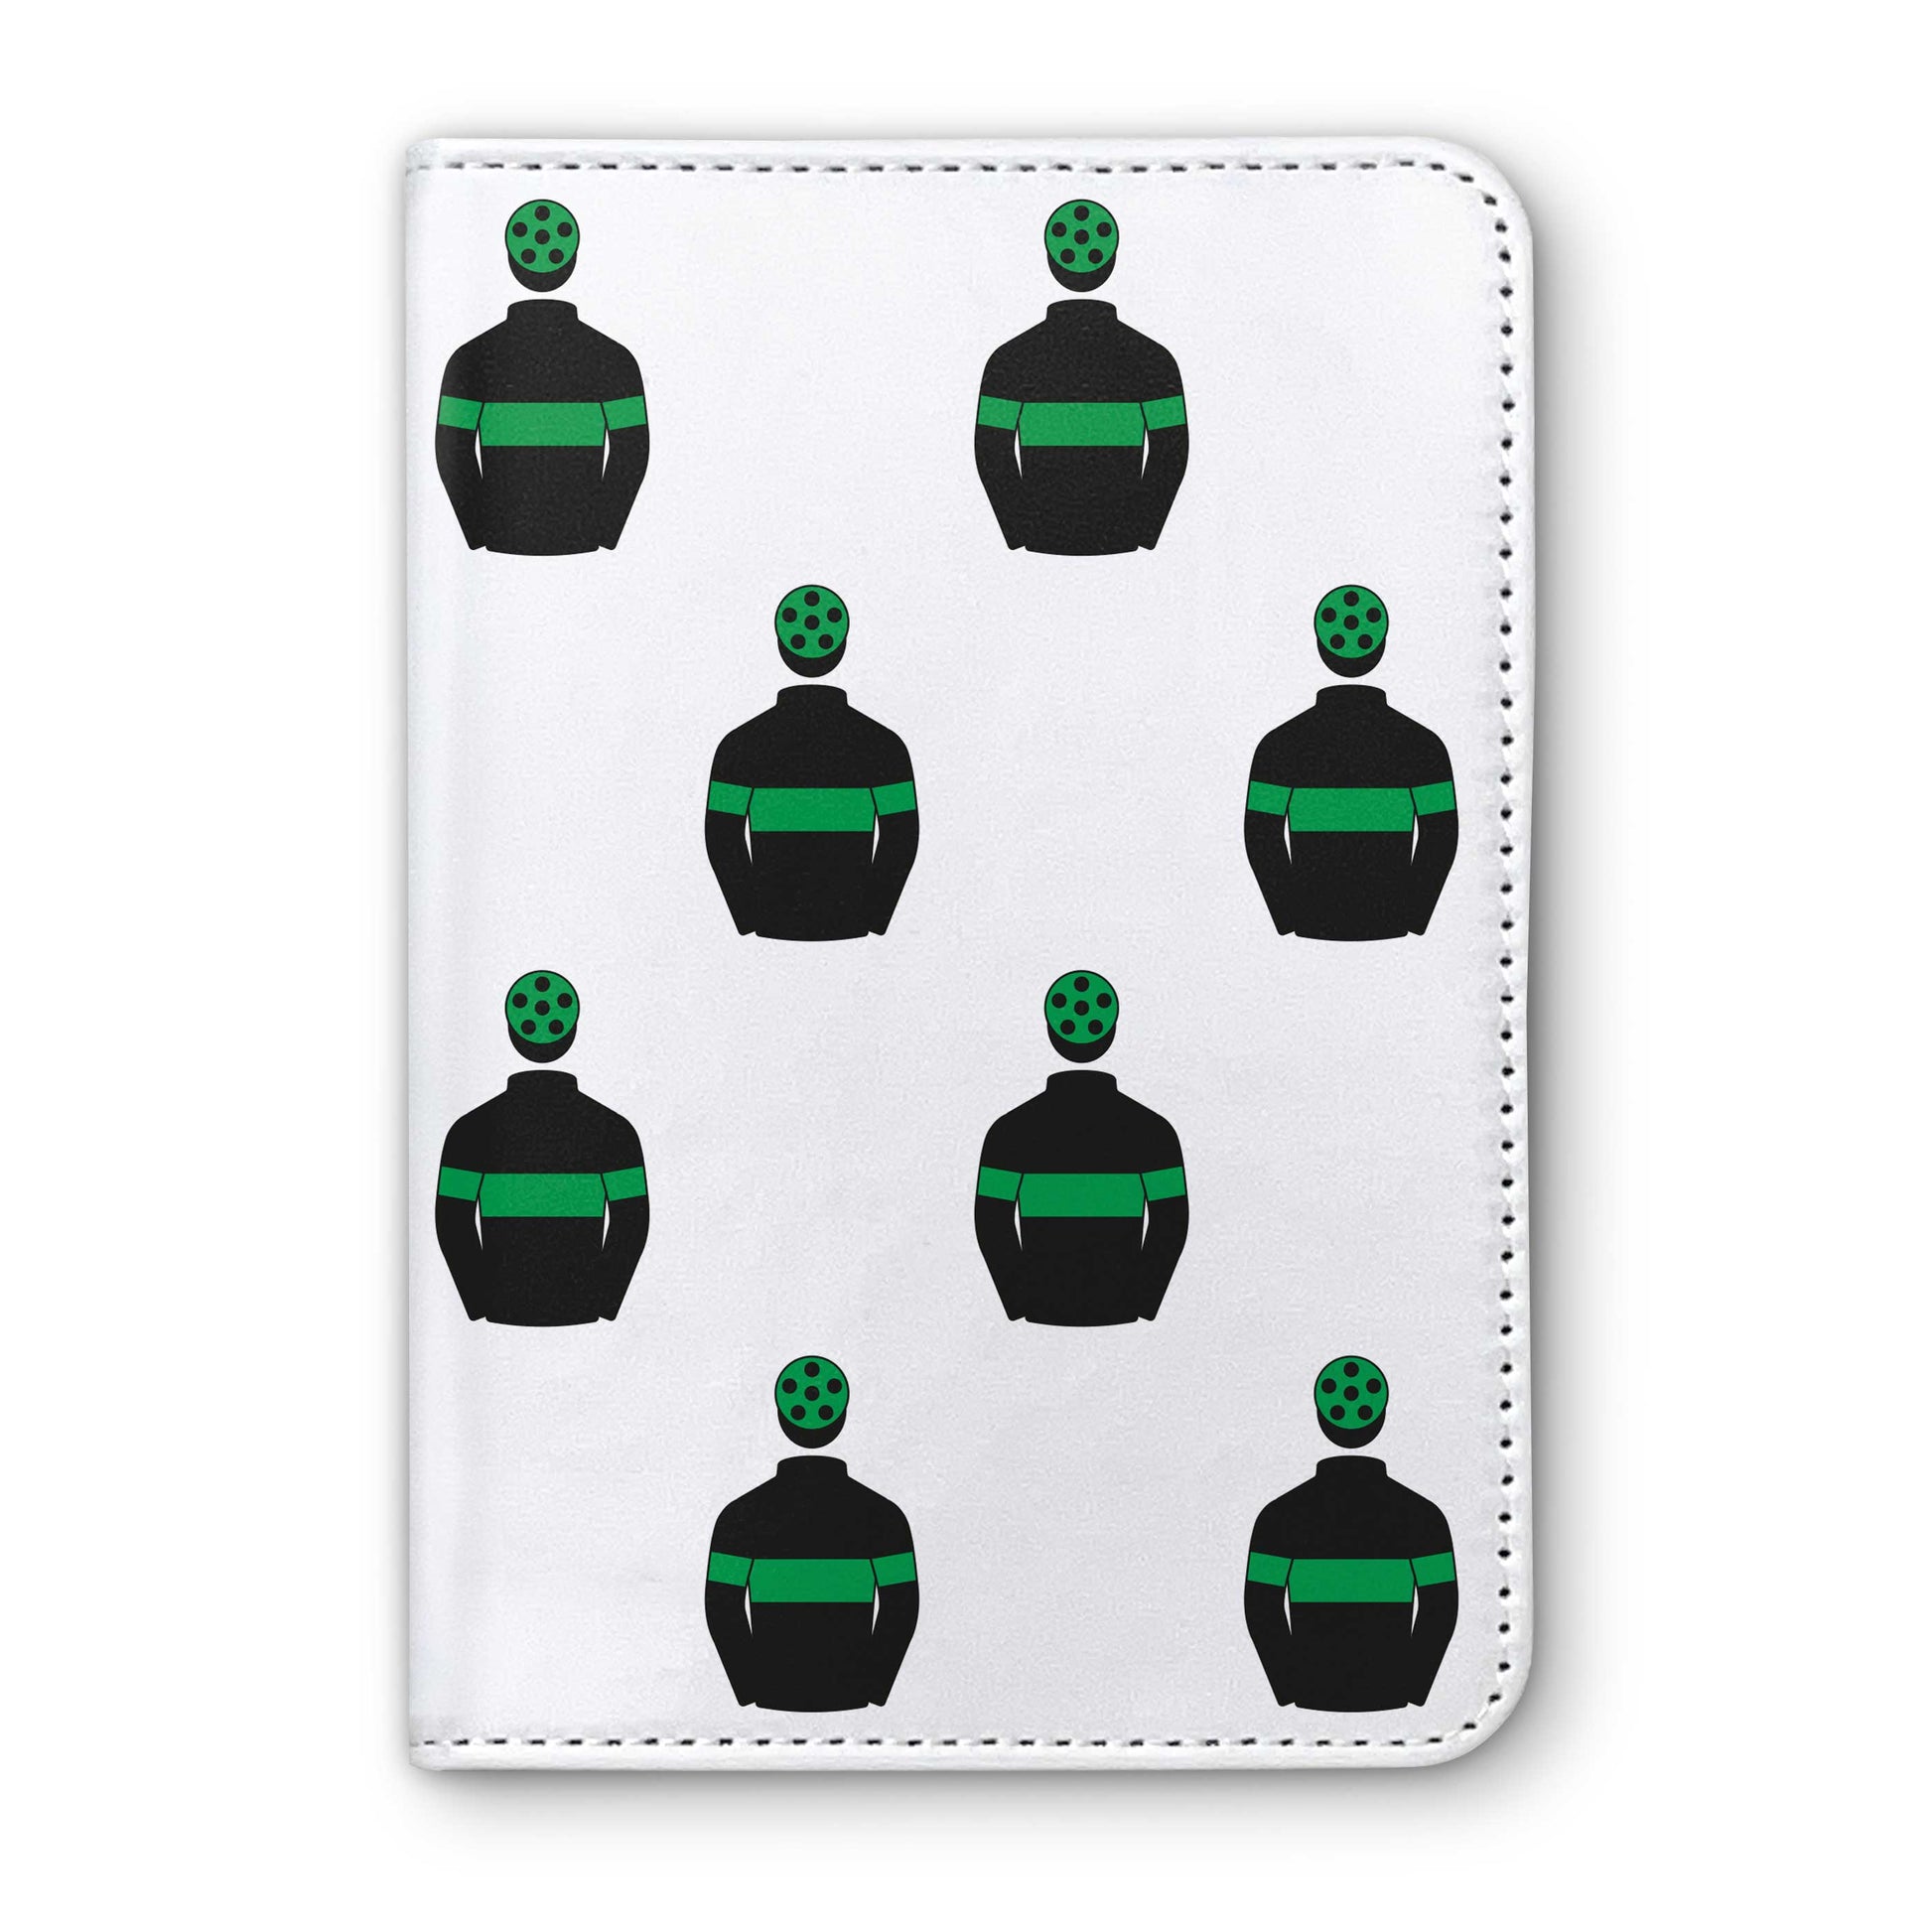 A N Solomons Club Horse Racing Passport Holder - Hacked Up Horse Racing Gifts